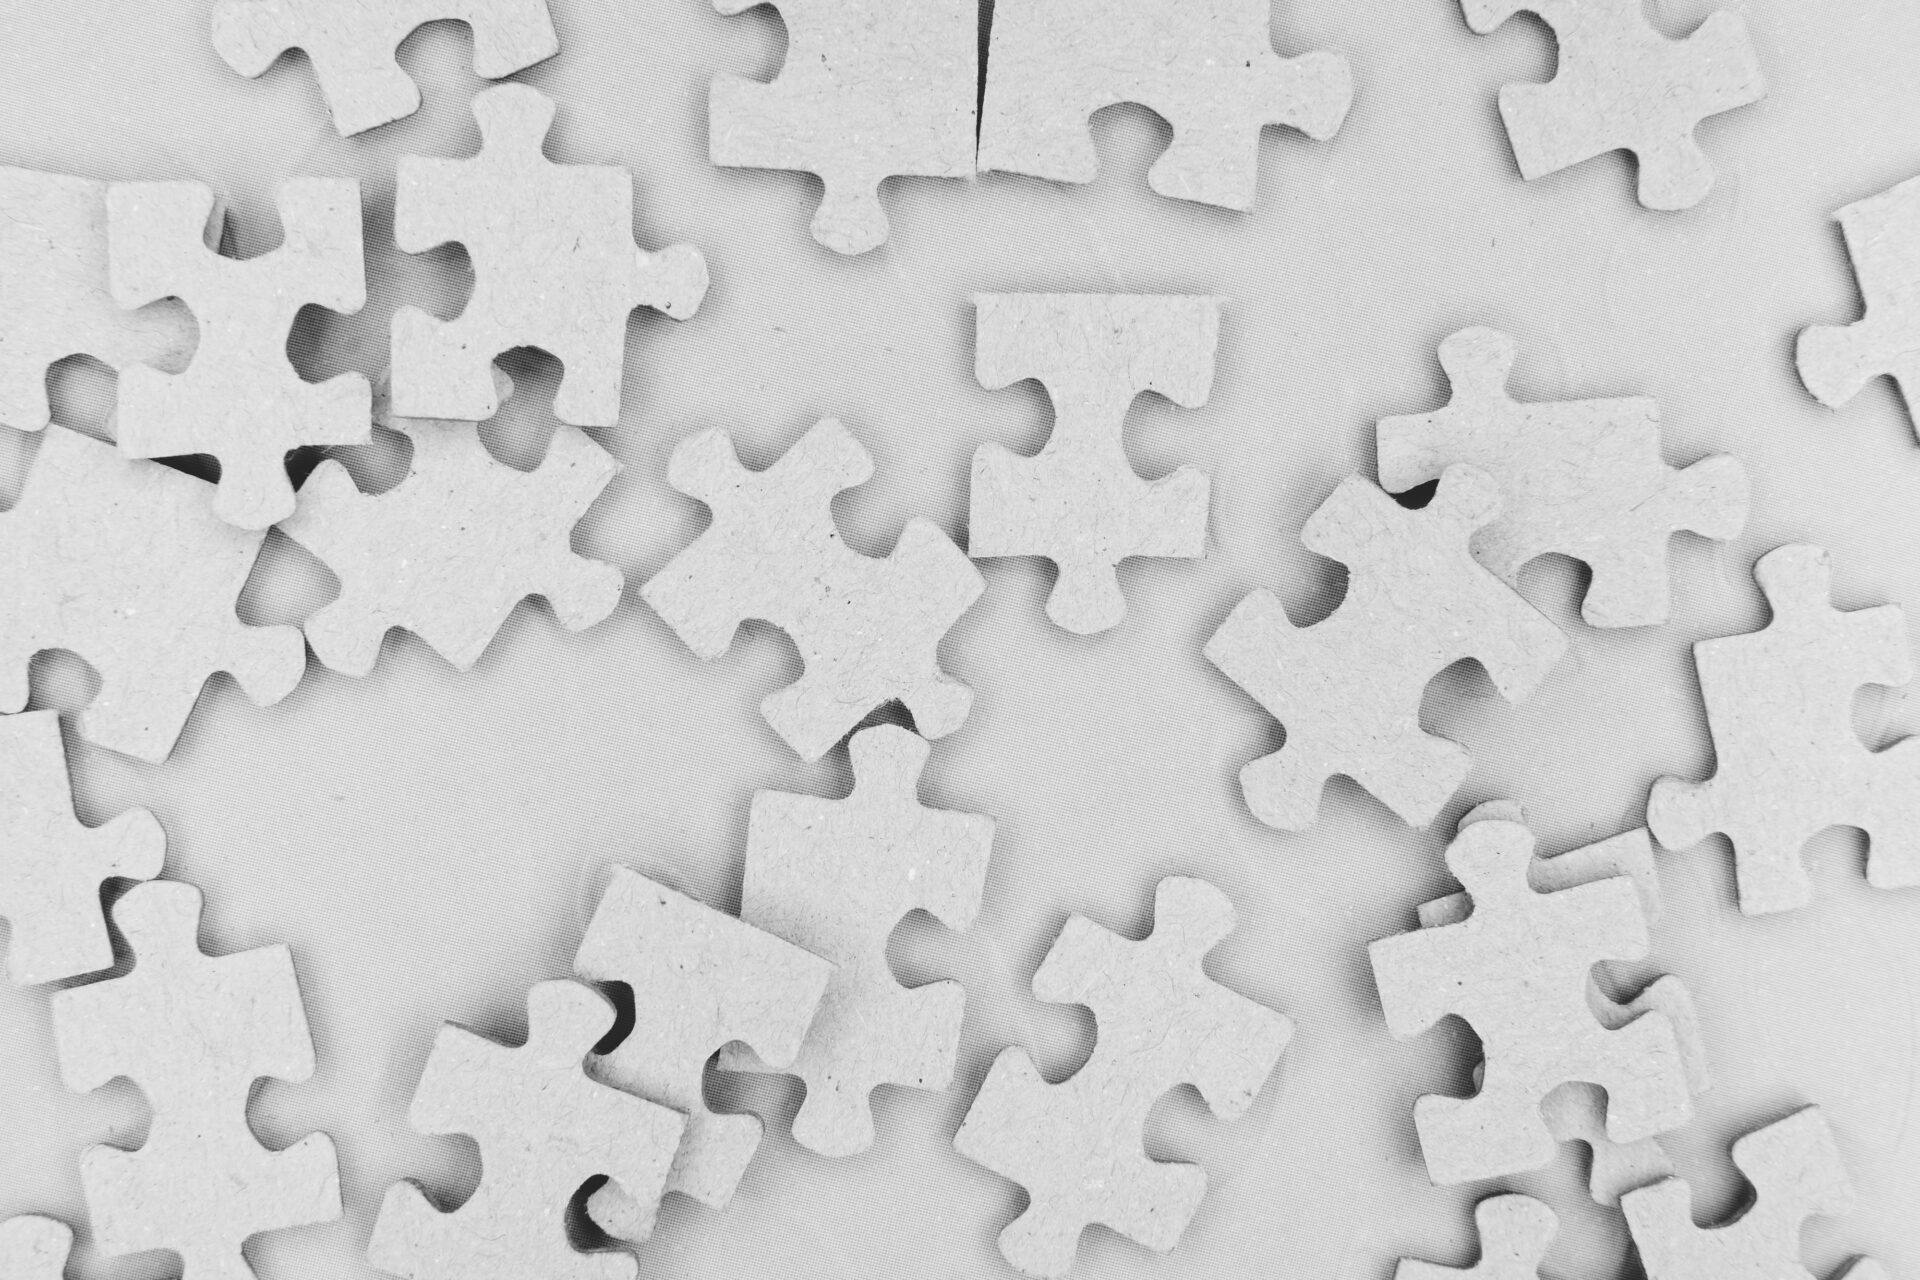 image of white puzzle pieces scattered on a table